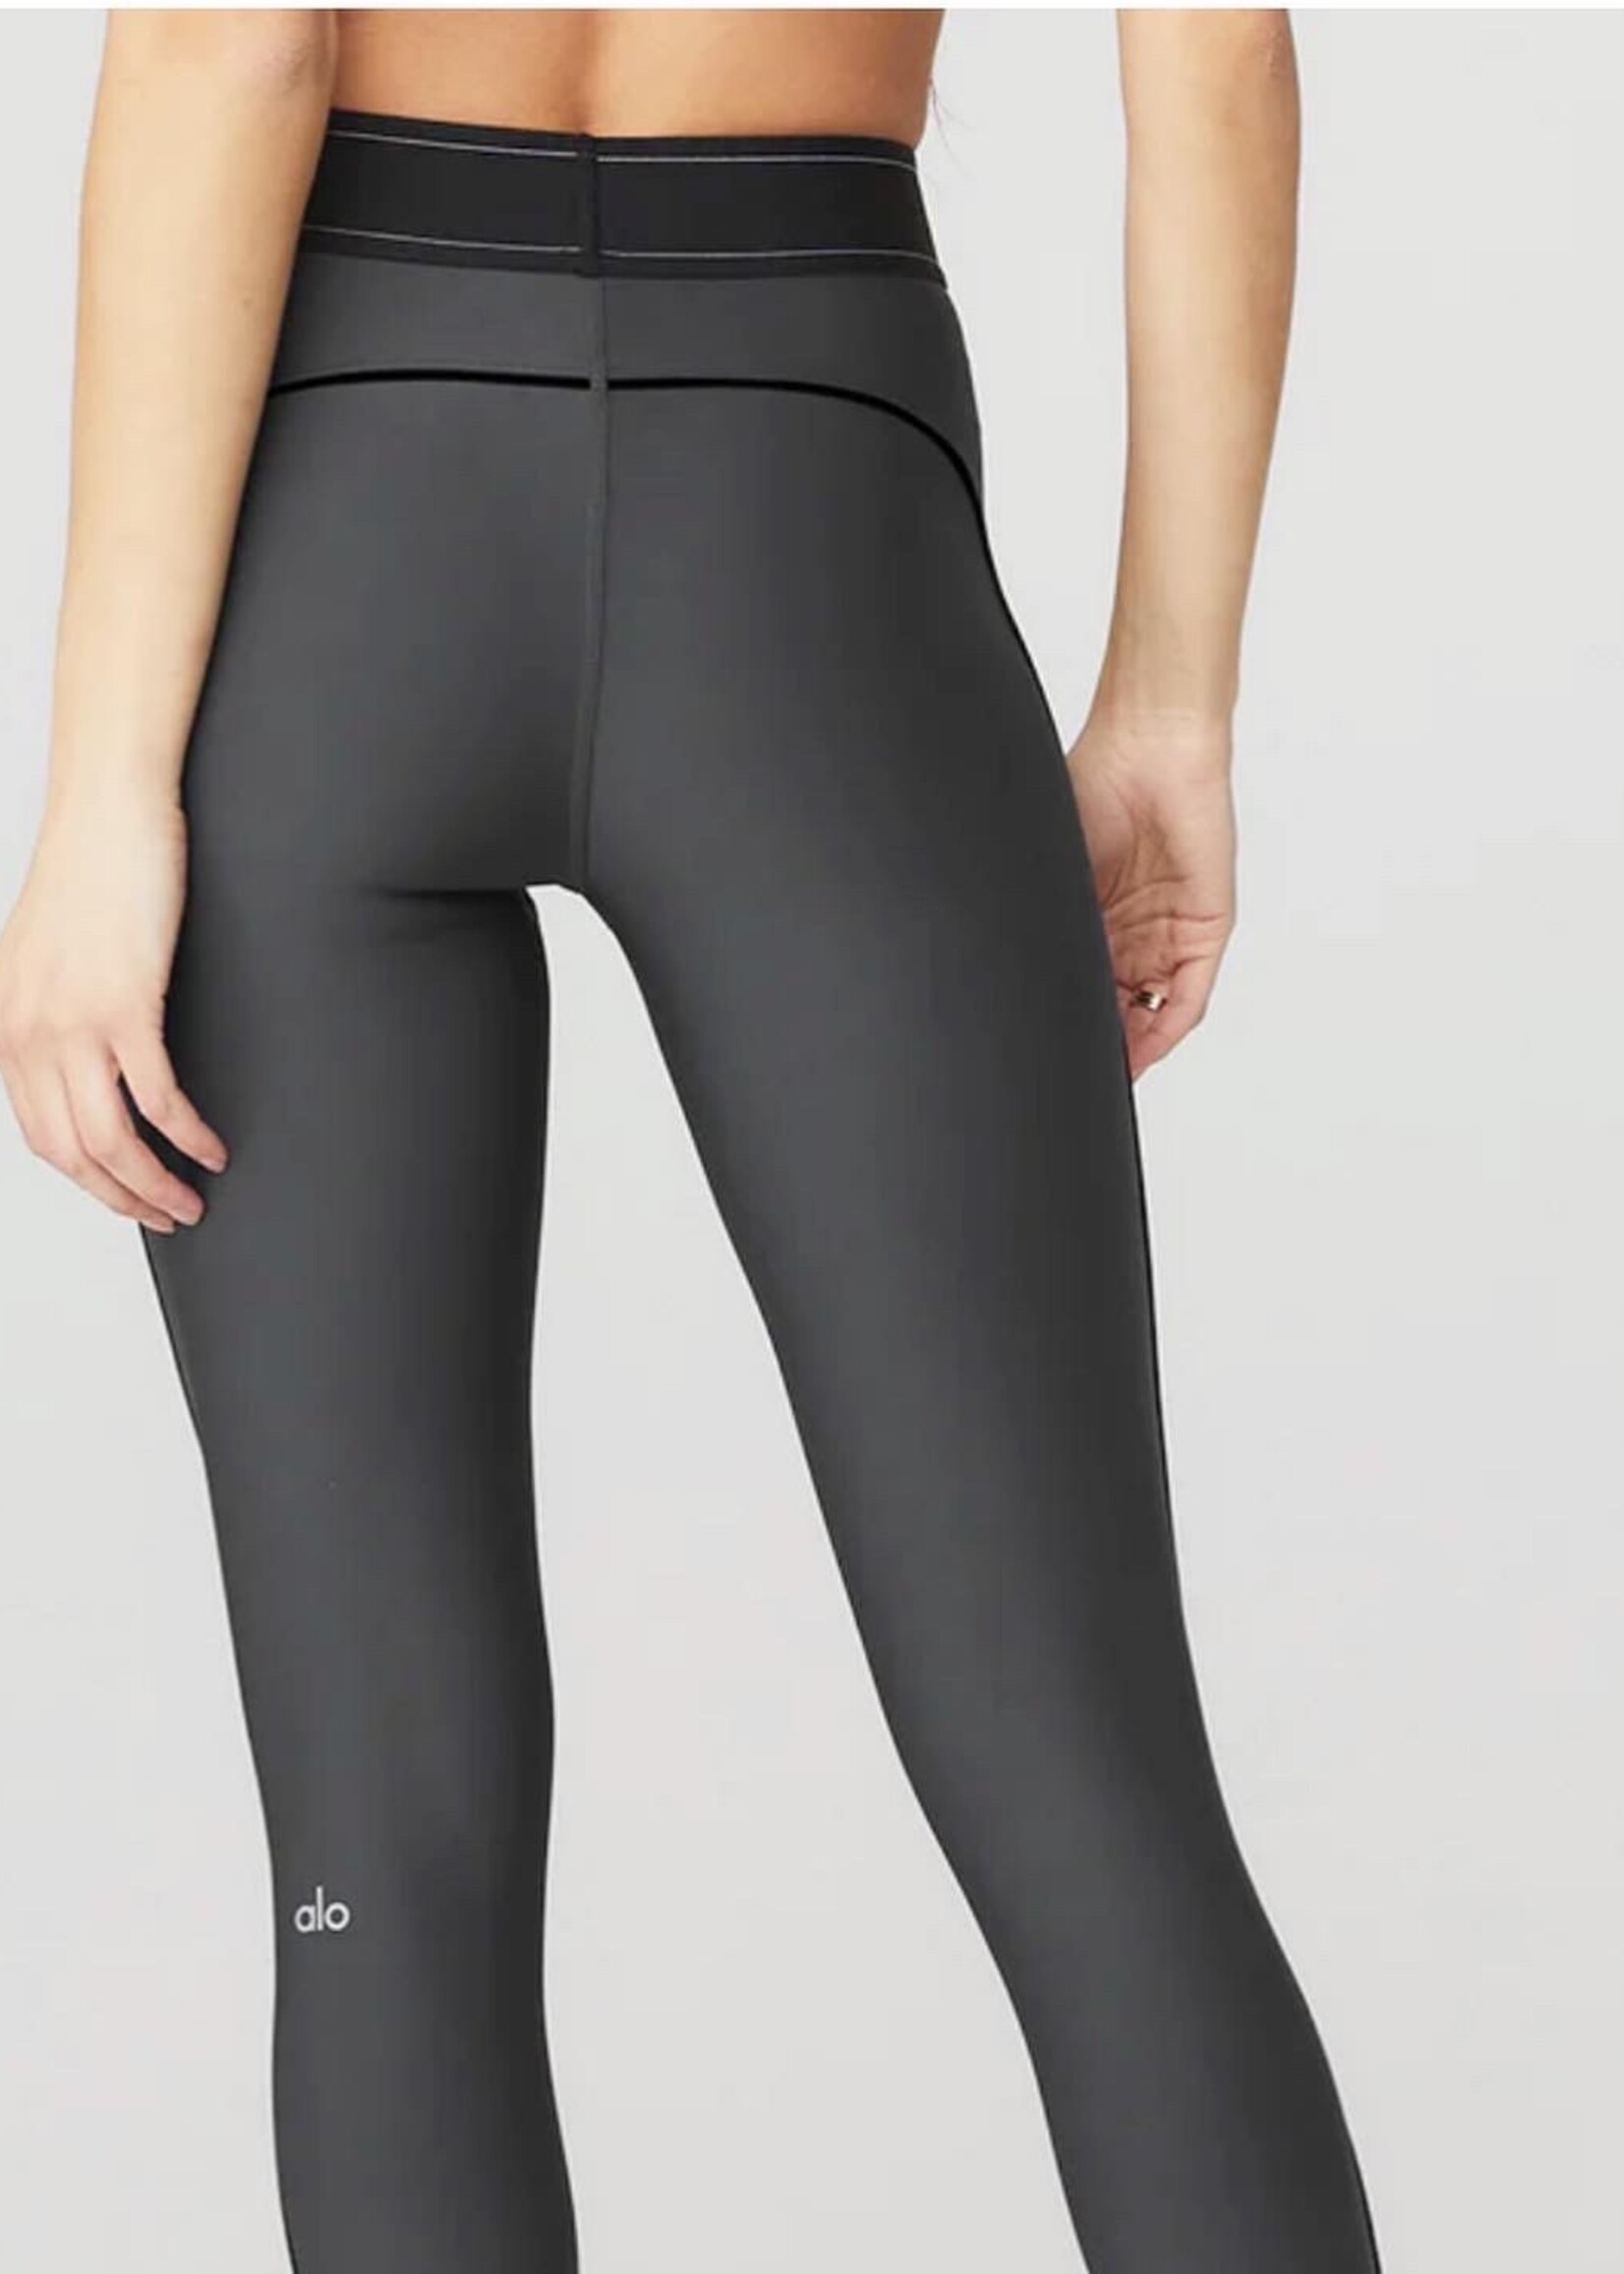 Alo Airlift High-Waist Suit Up Legging- Anthracite/Black